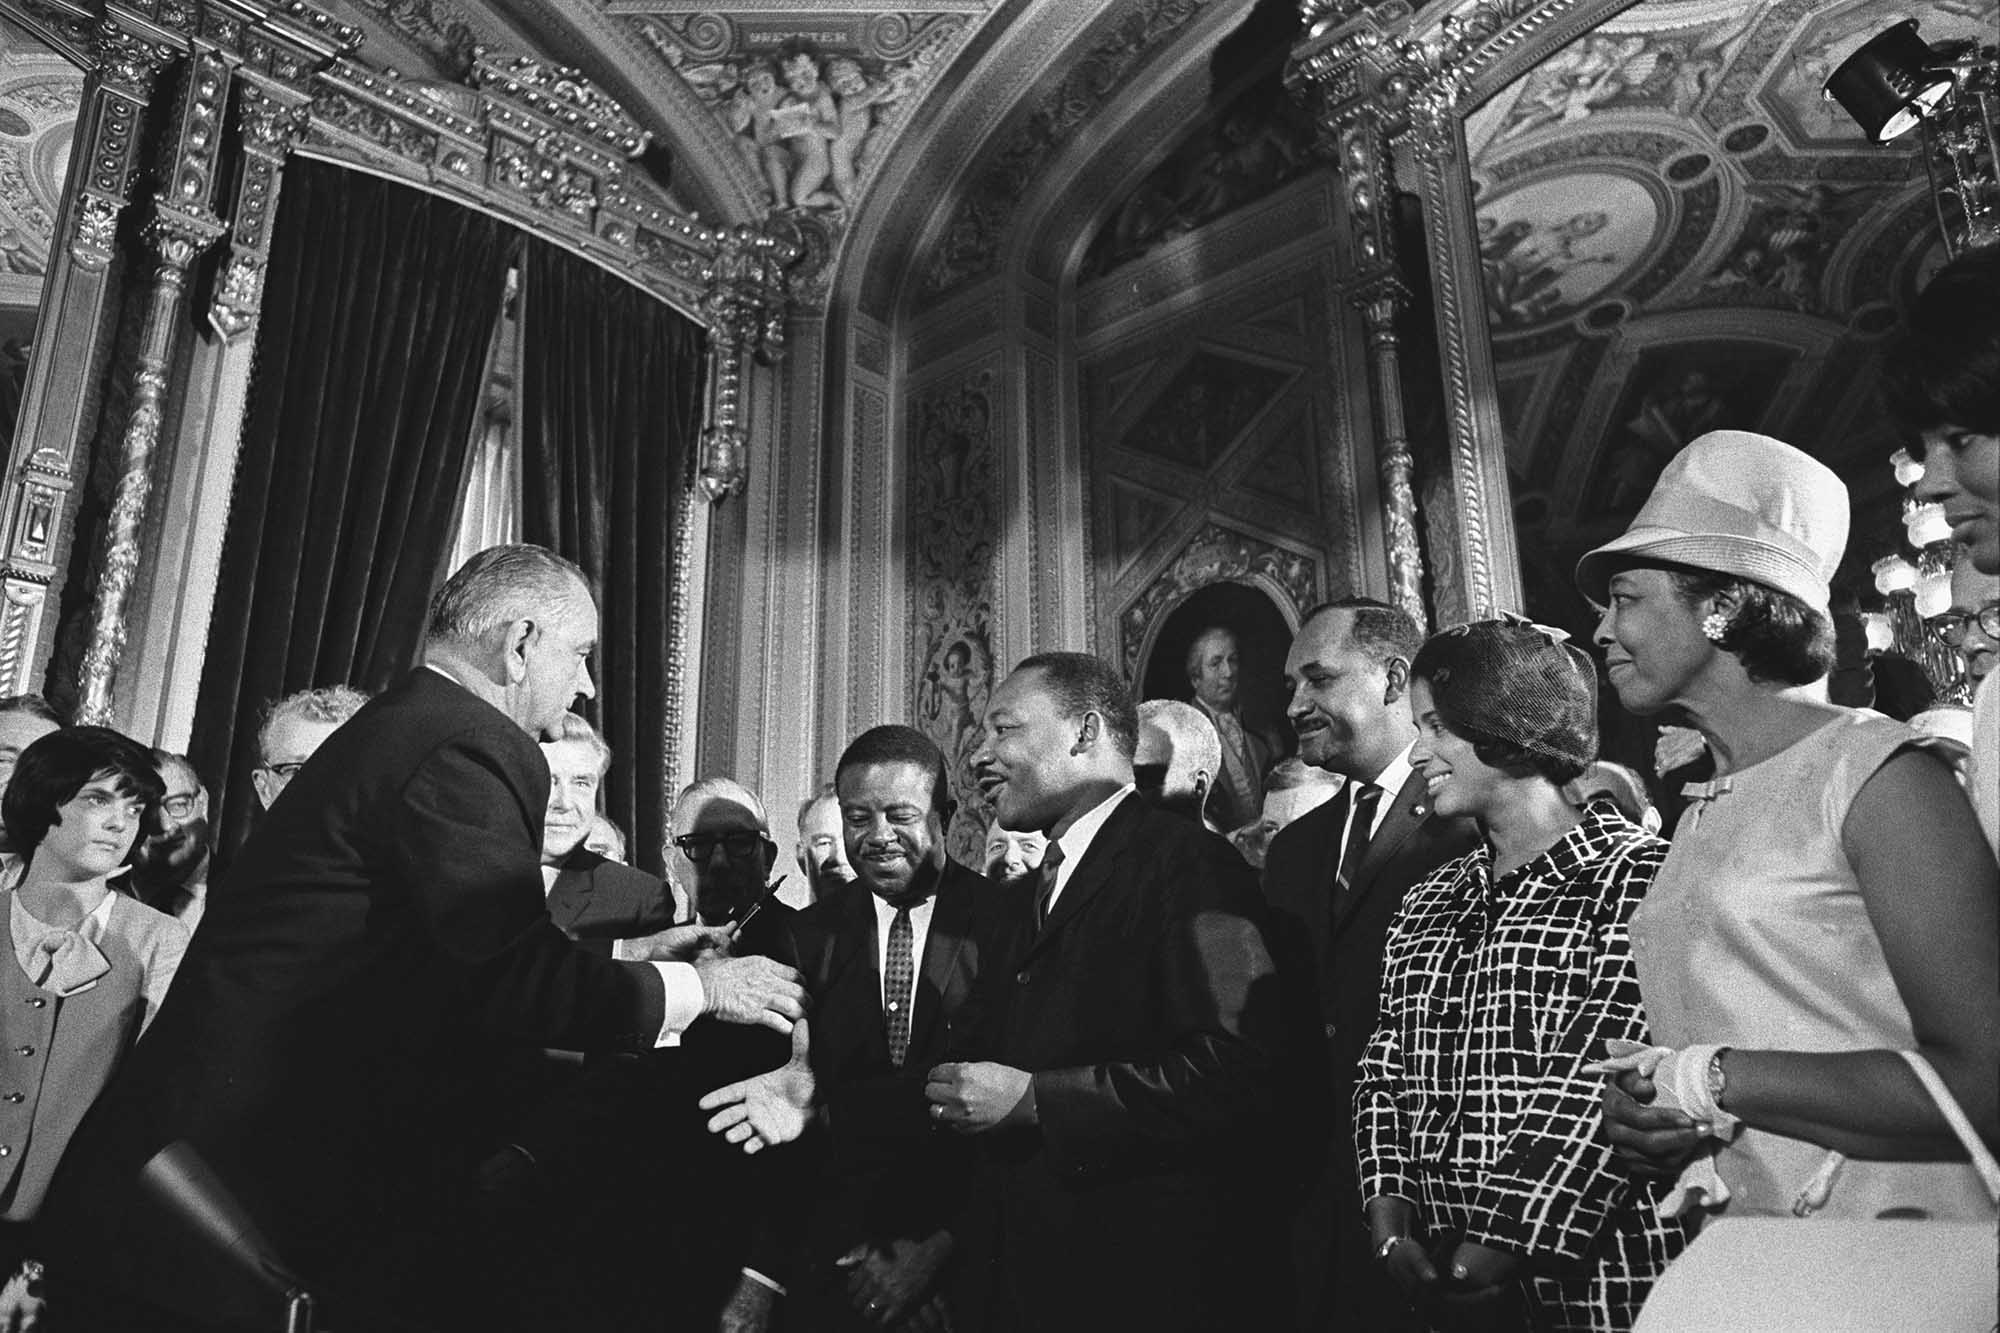 Martin Luther King J. meeting with Lyndon B. Johnson with crowd of people